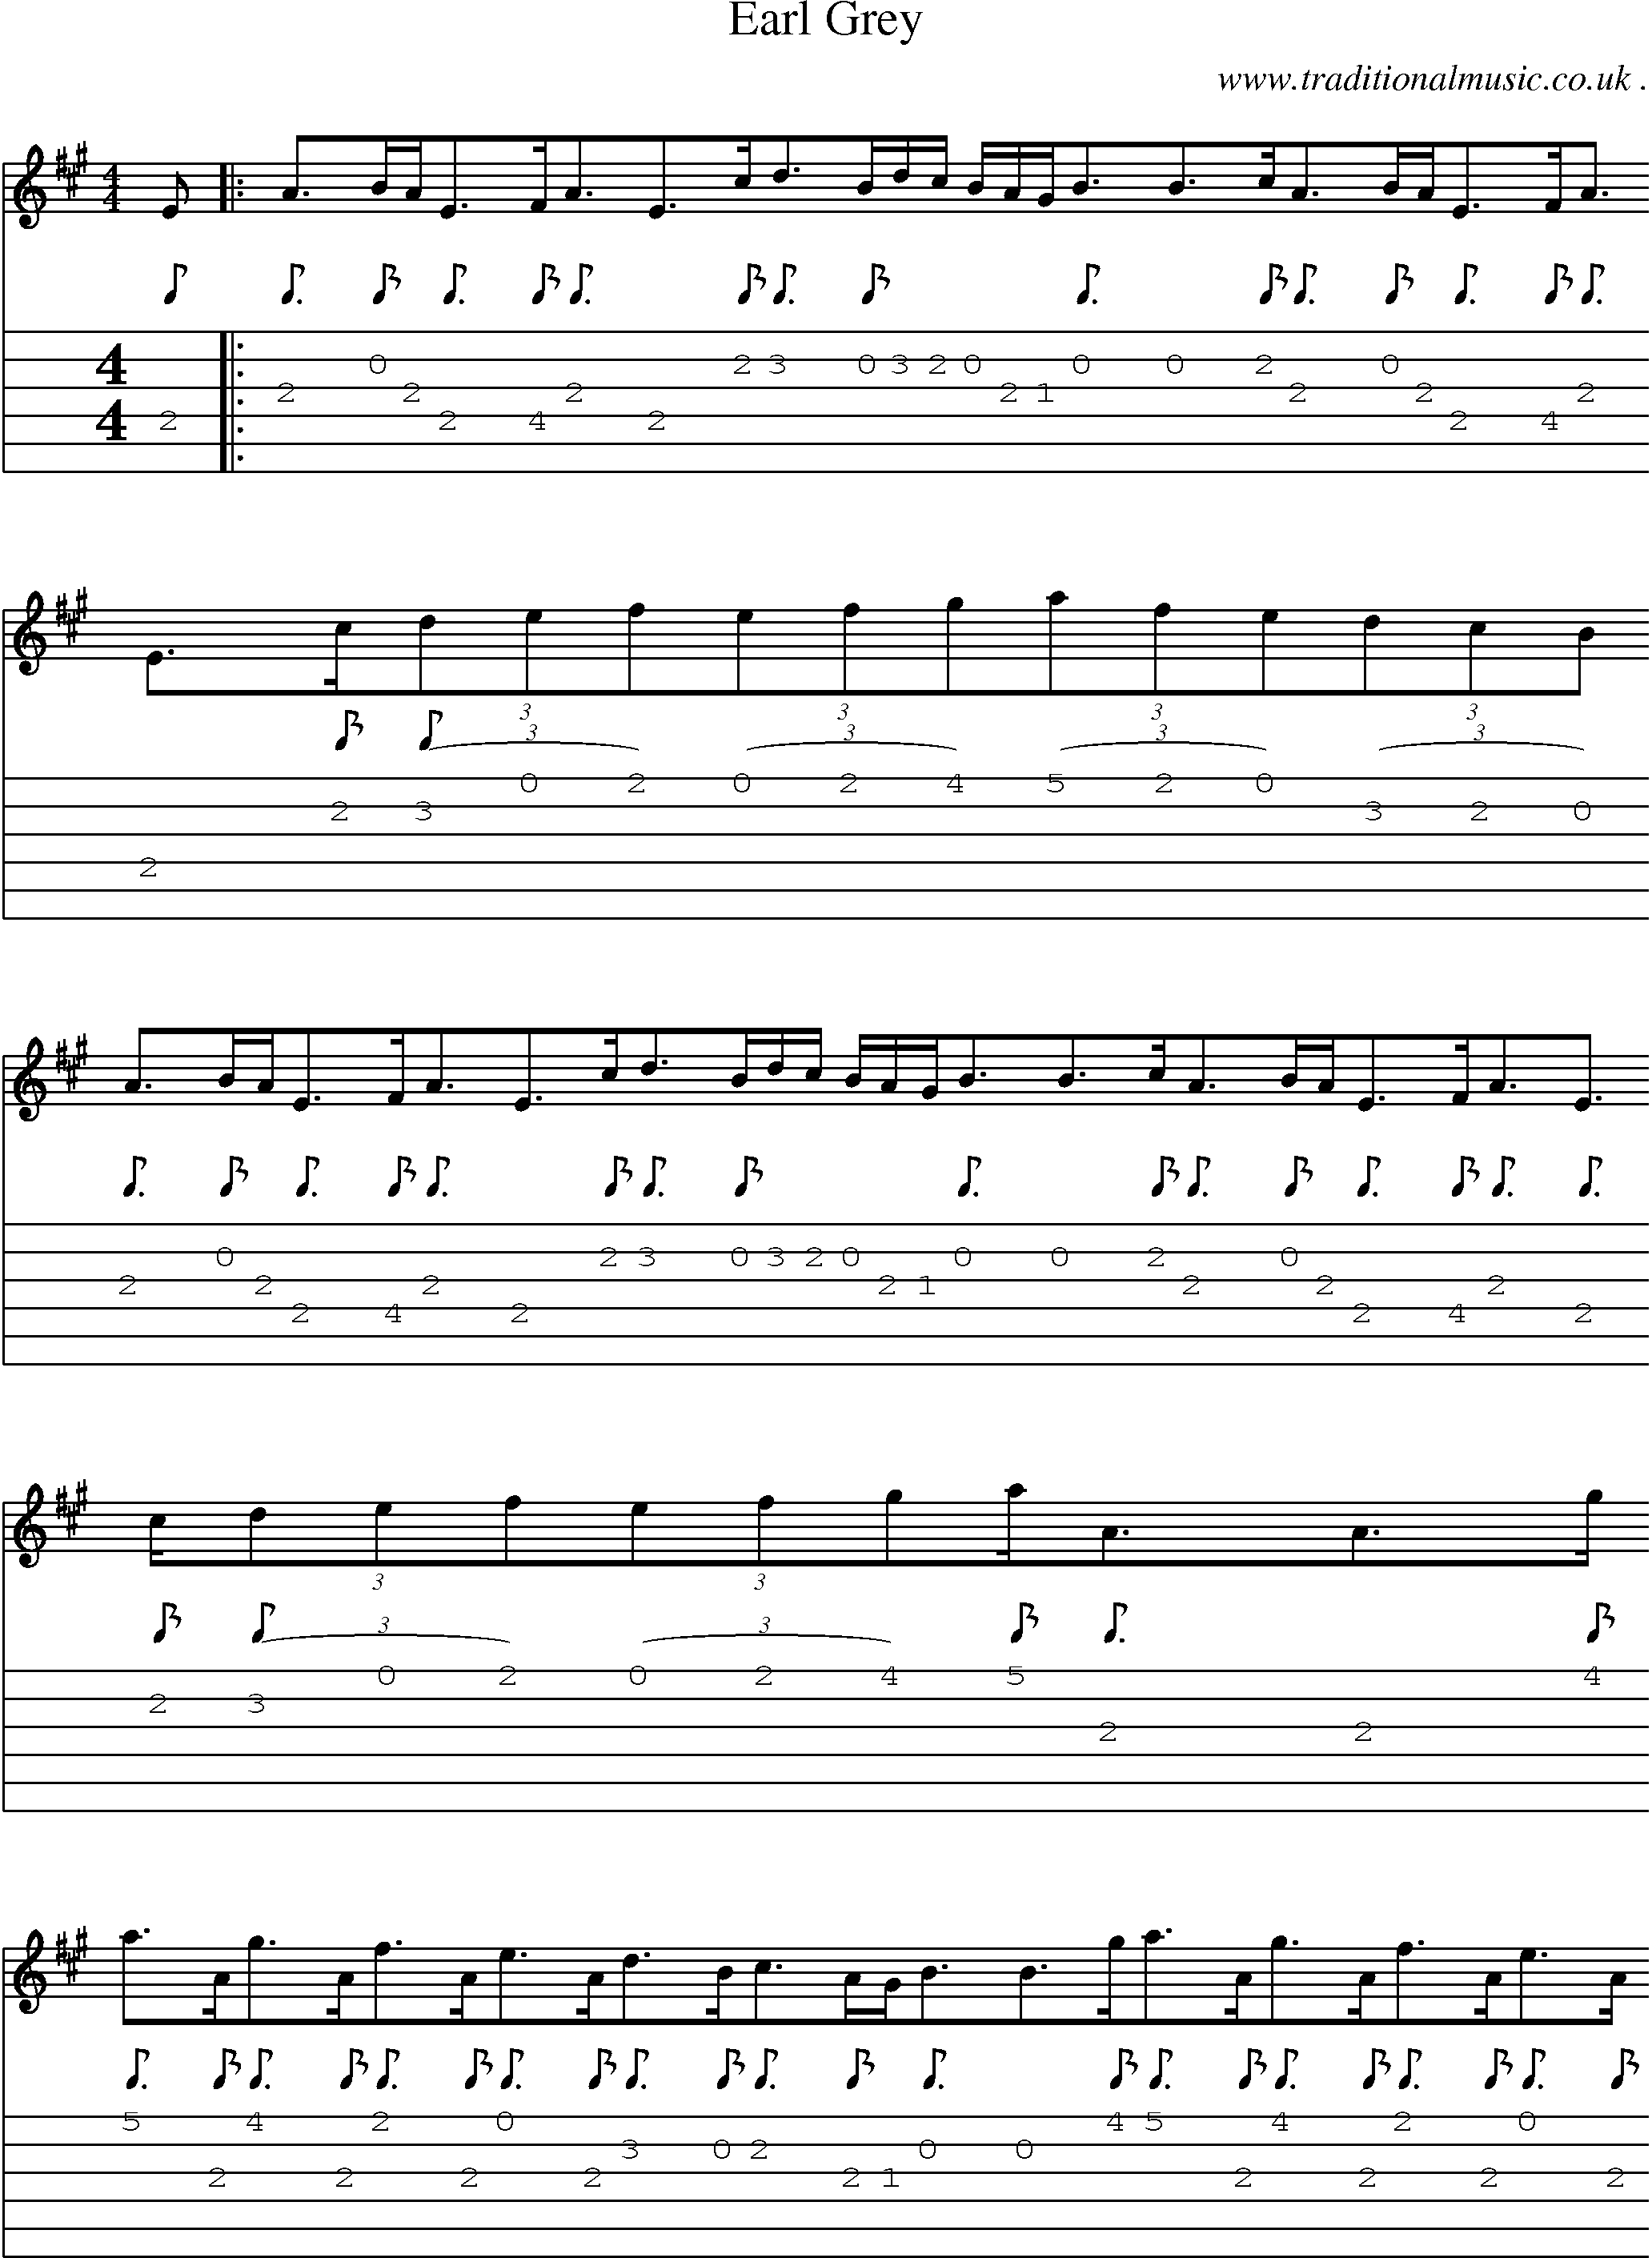 Sheet-Music and Guitar Tabs for Earl Grey